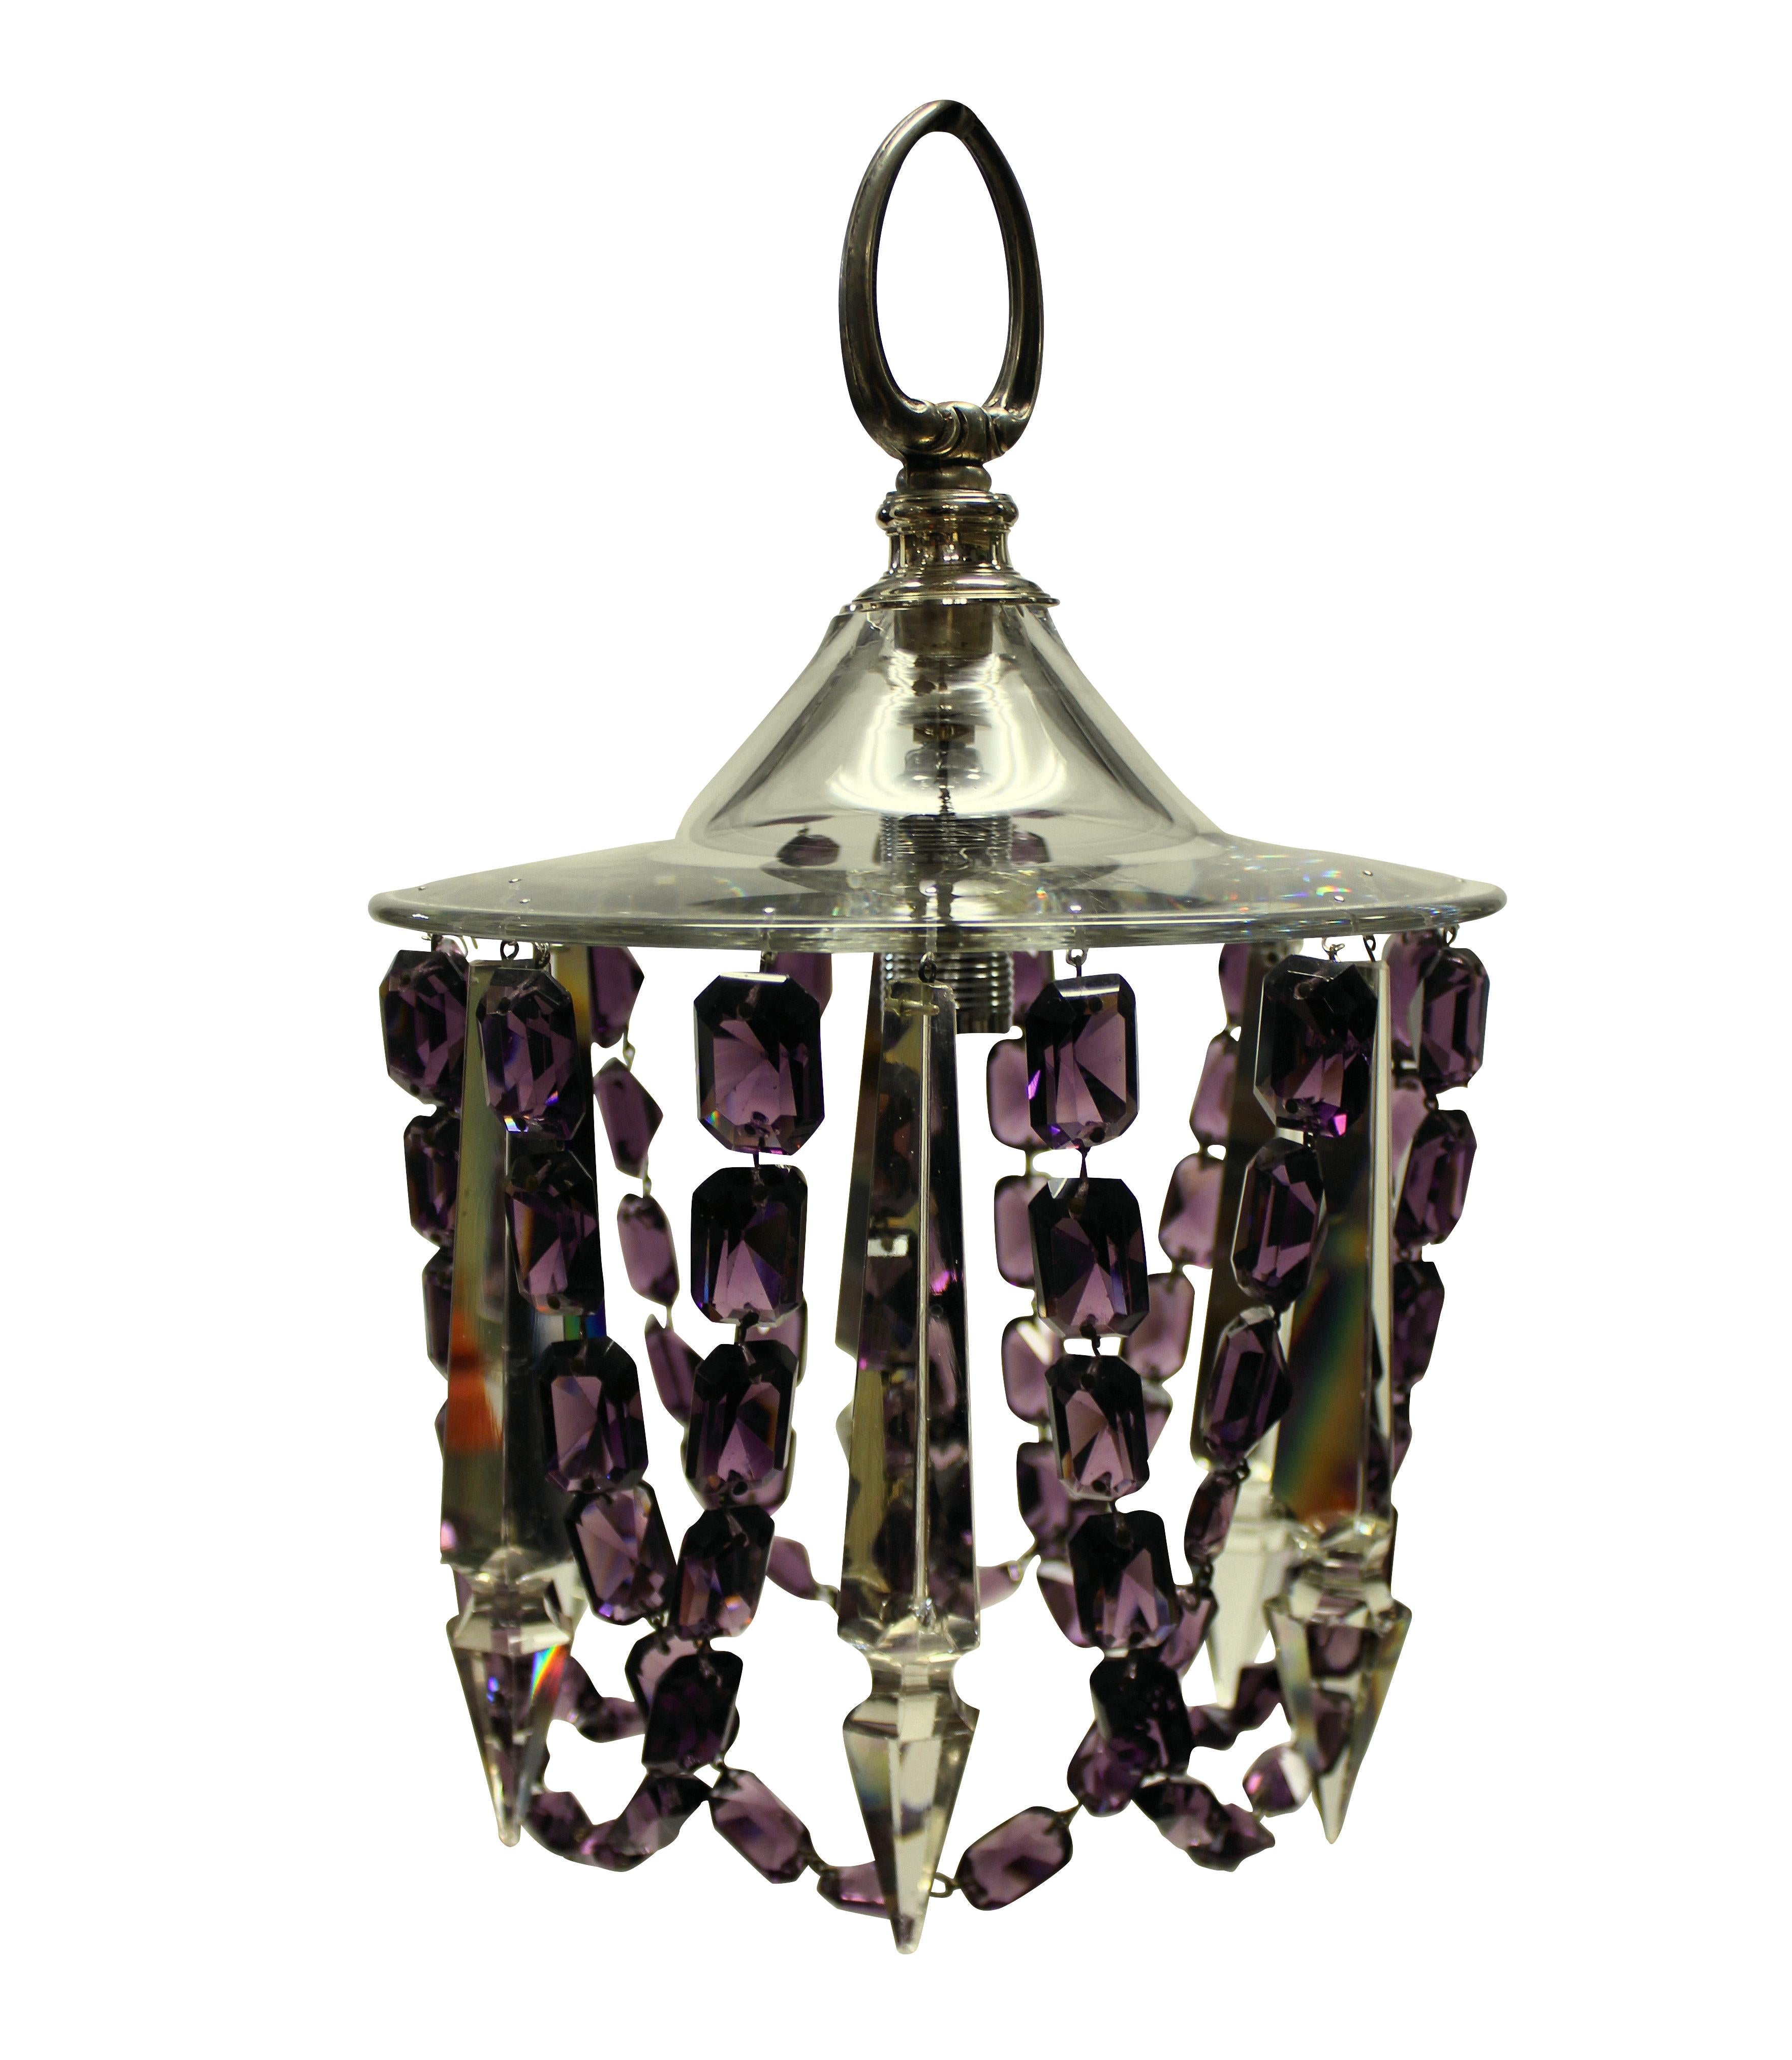 A pair of charming little English cut glass ceiling lights, hung with pendants and amethyst glass.